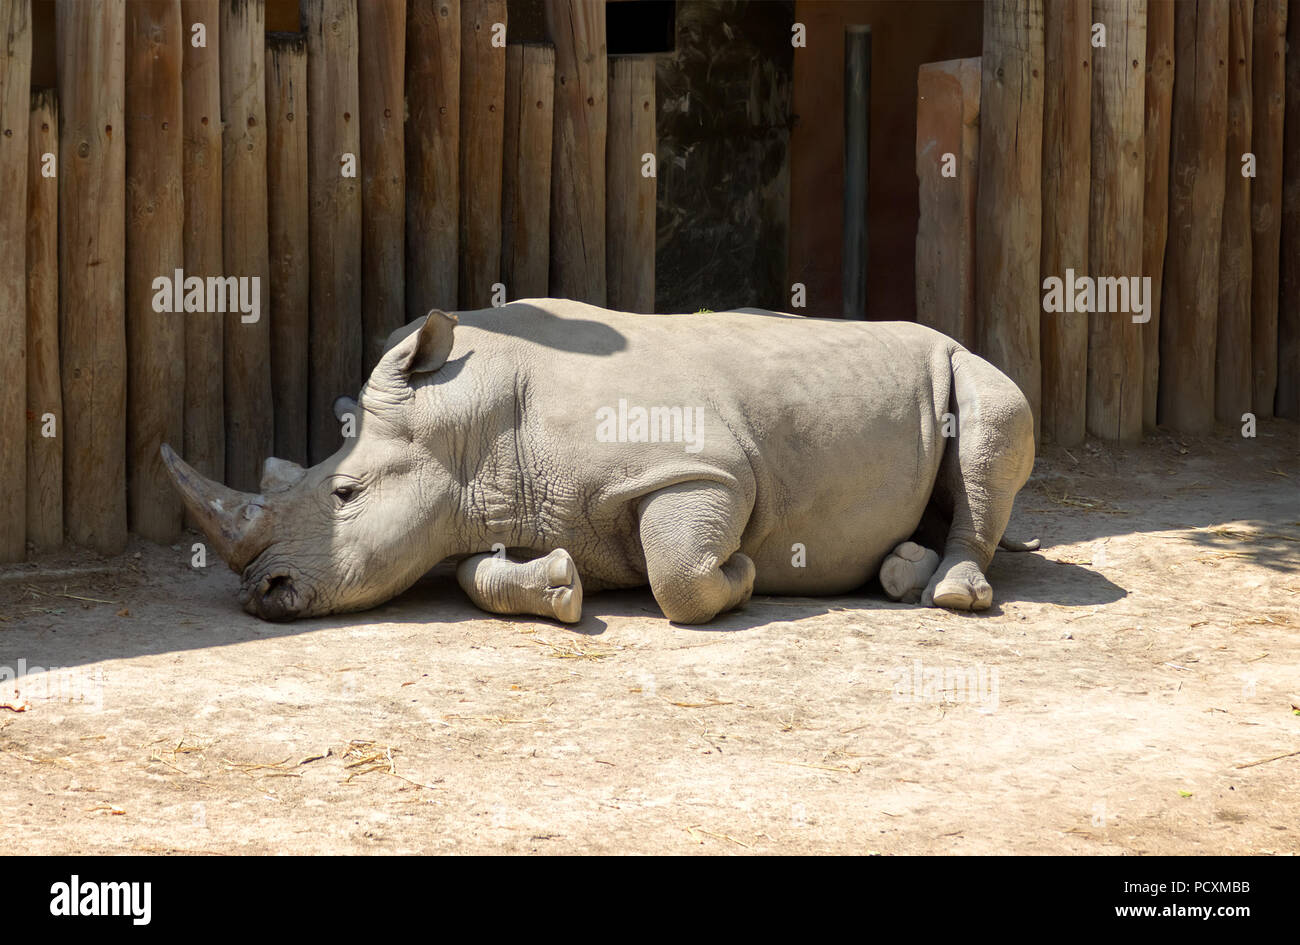 Closeup of Rhino or Rhinoceros resting on the dry ground in the shadow of the wooden fence in  a summer sunny day. Stock Photo